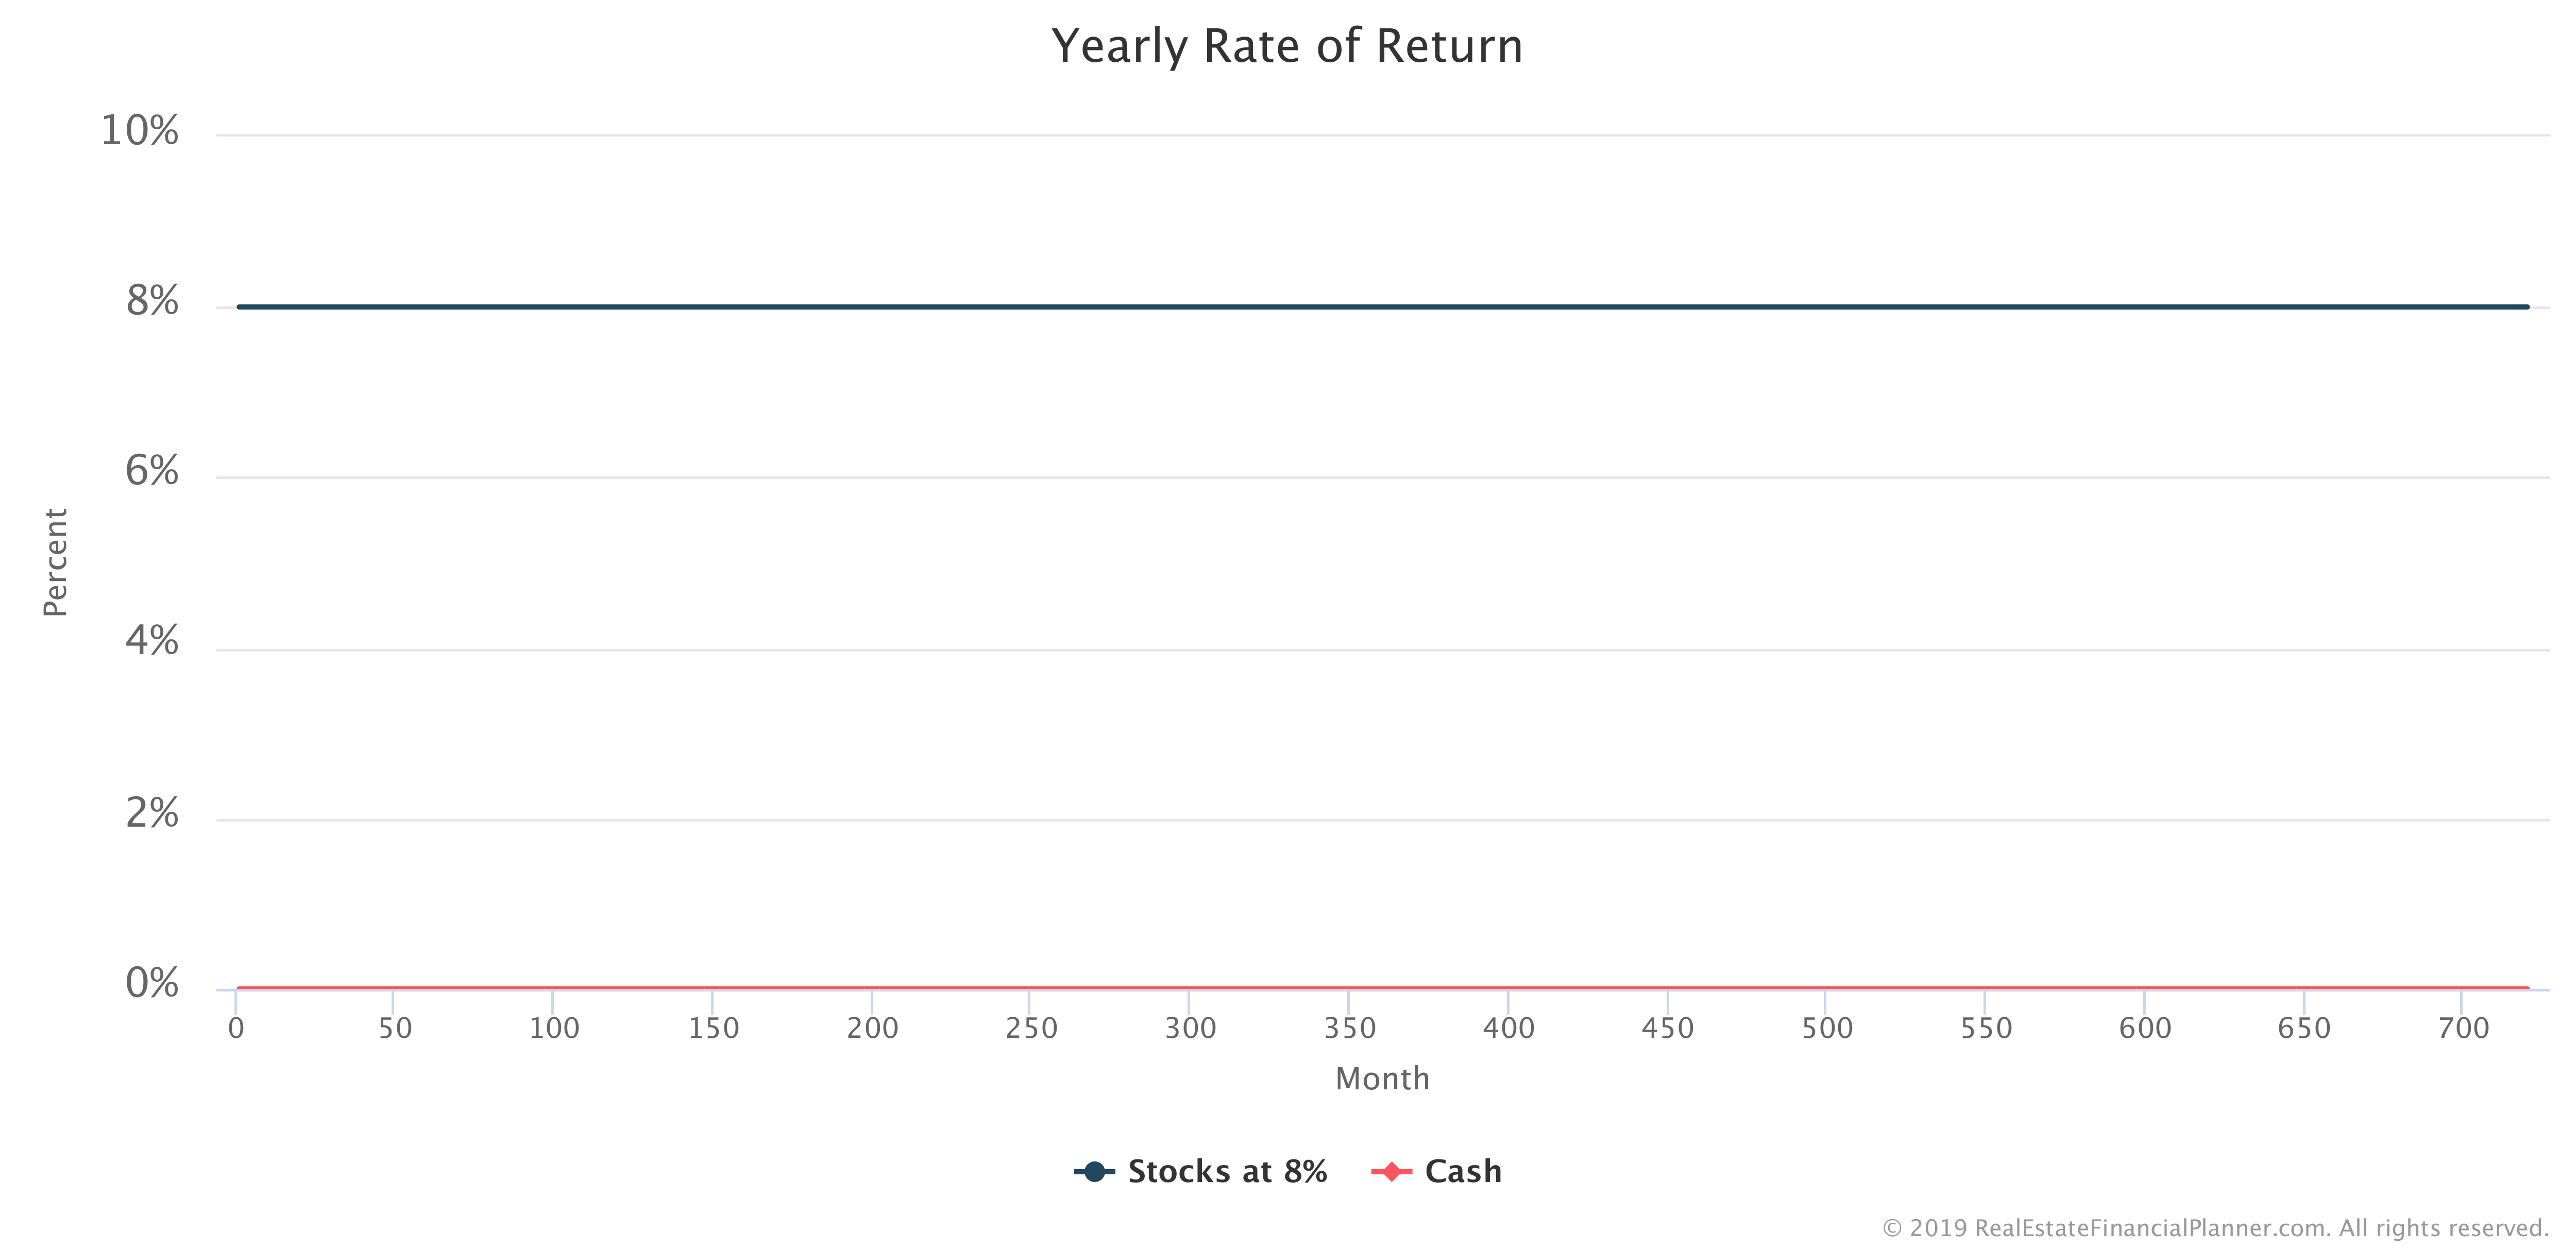 Yearly Rate of Return